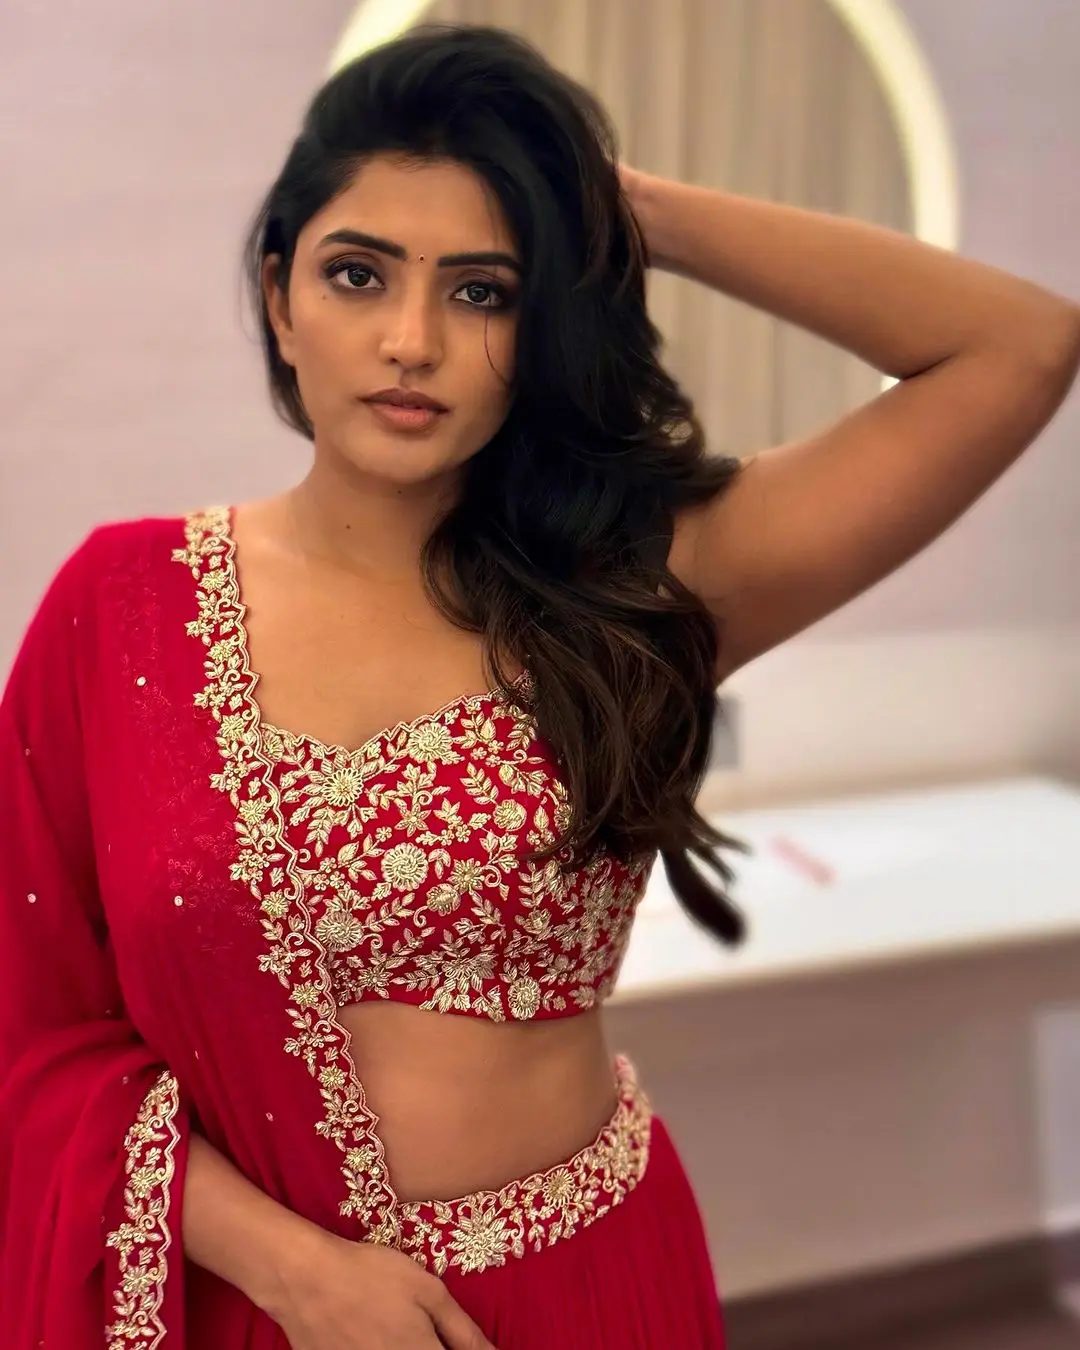 Eesha Rebba shares her Latest Photos in Instagram